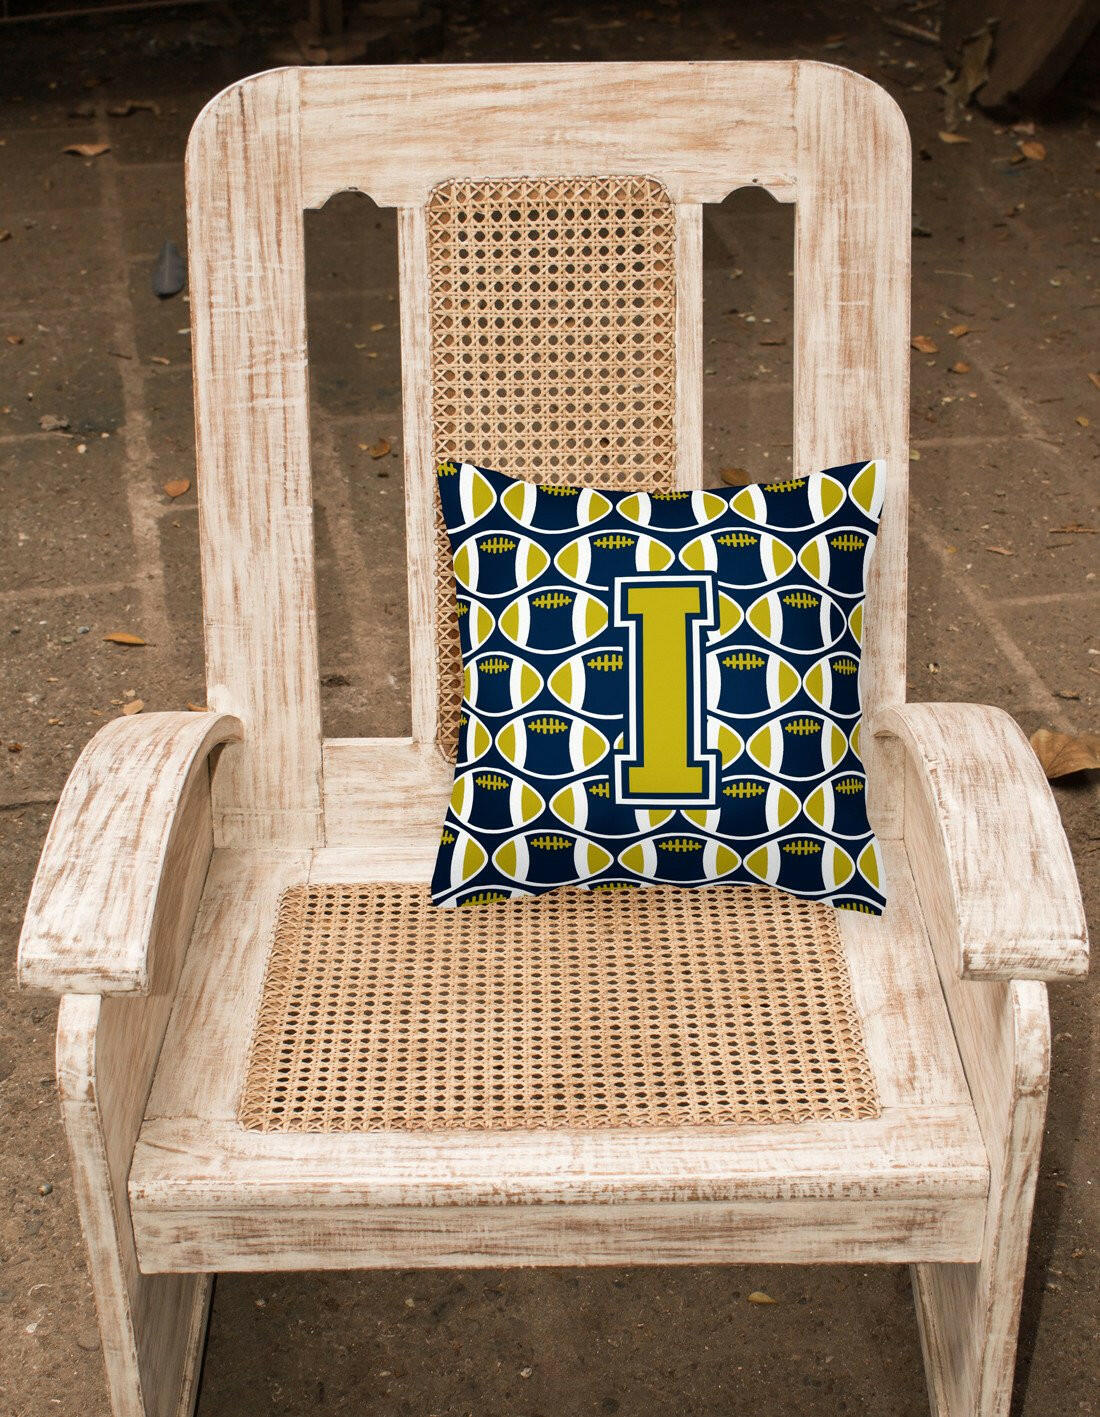 Letter I Football Blue and Gold Fabric Decorative Pillow CJ1074-IPW1414 by Caroline's Treasures